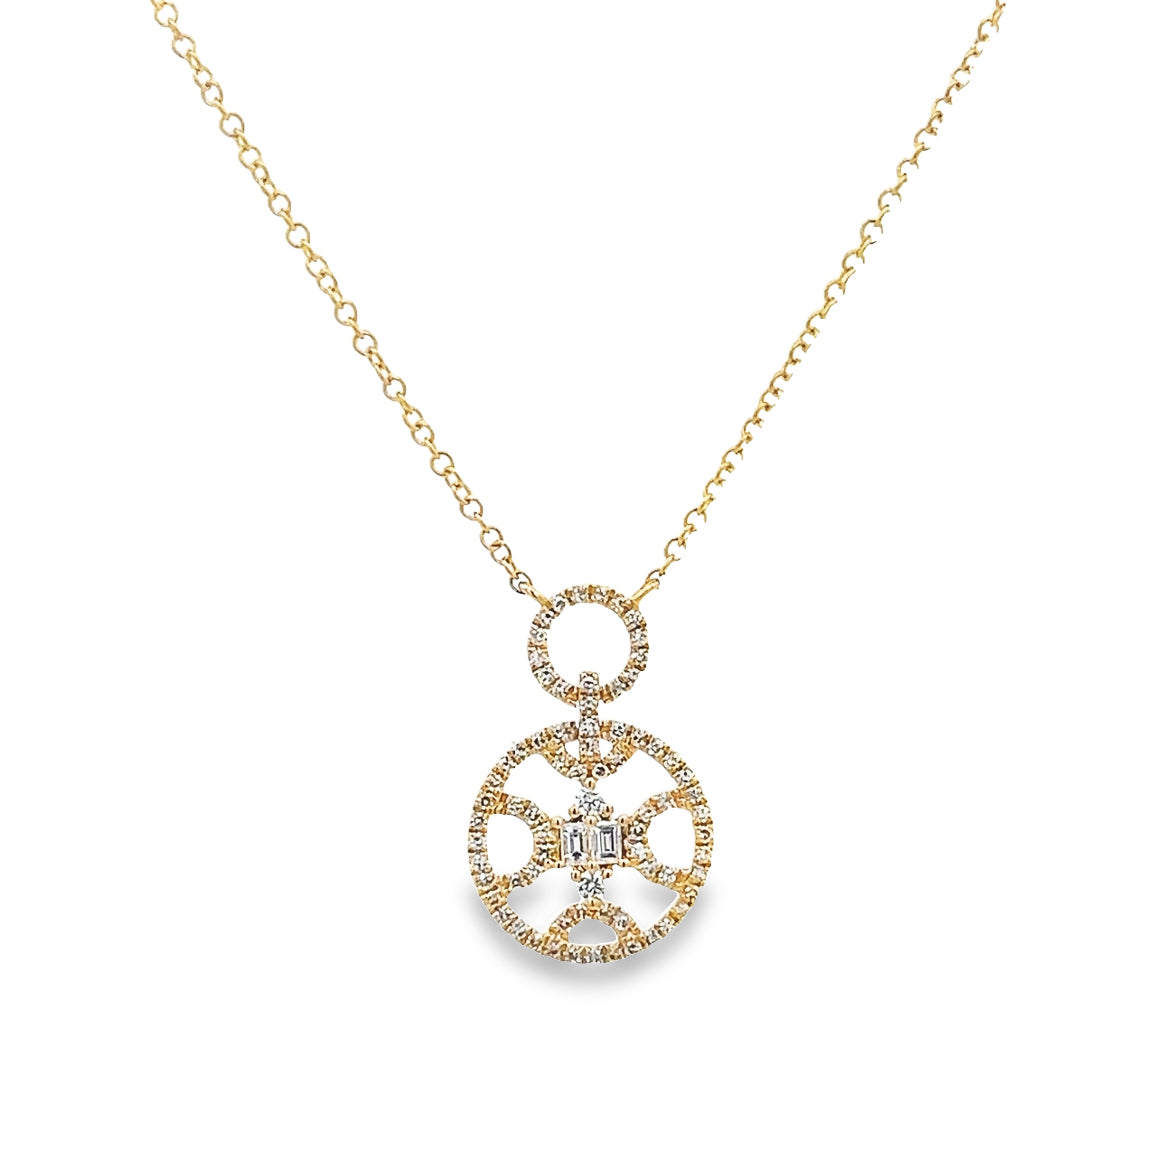 14K GOLD CIRCLE NECKLACE WITH BAGUETTE DIAMOND